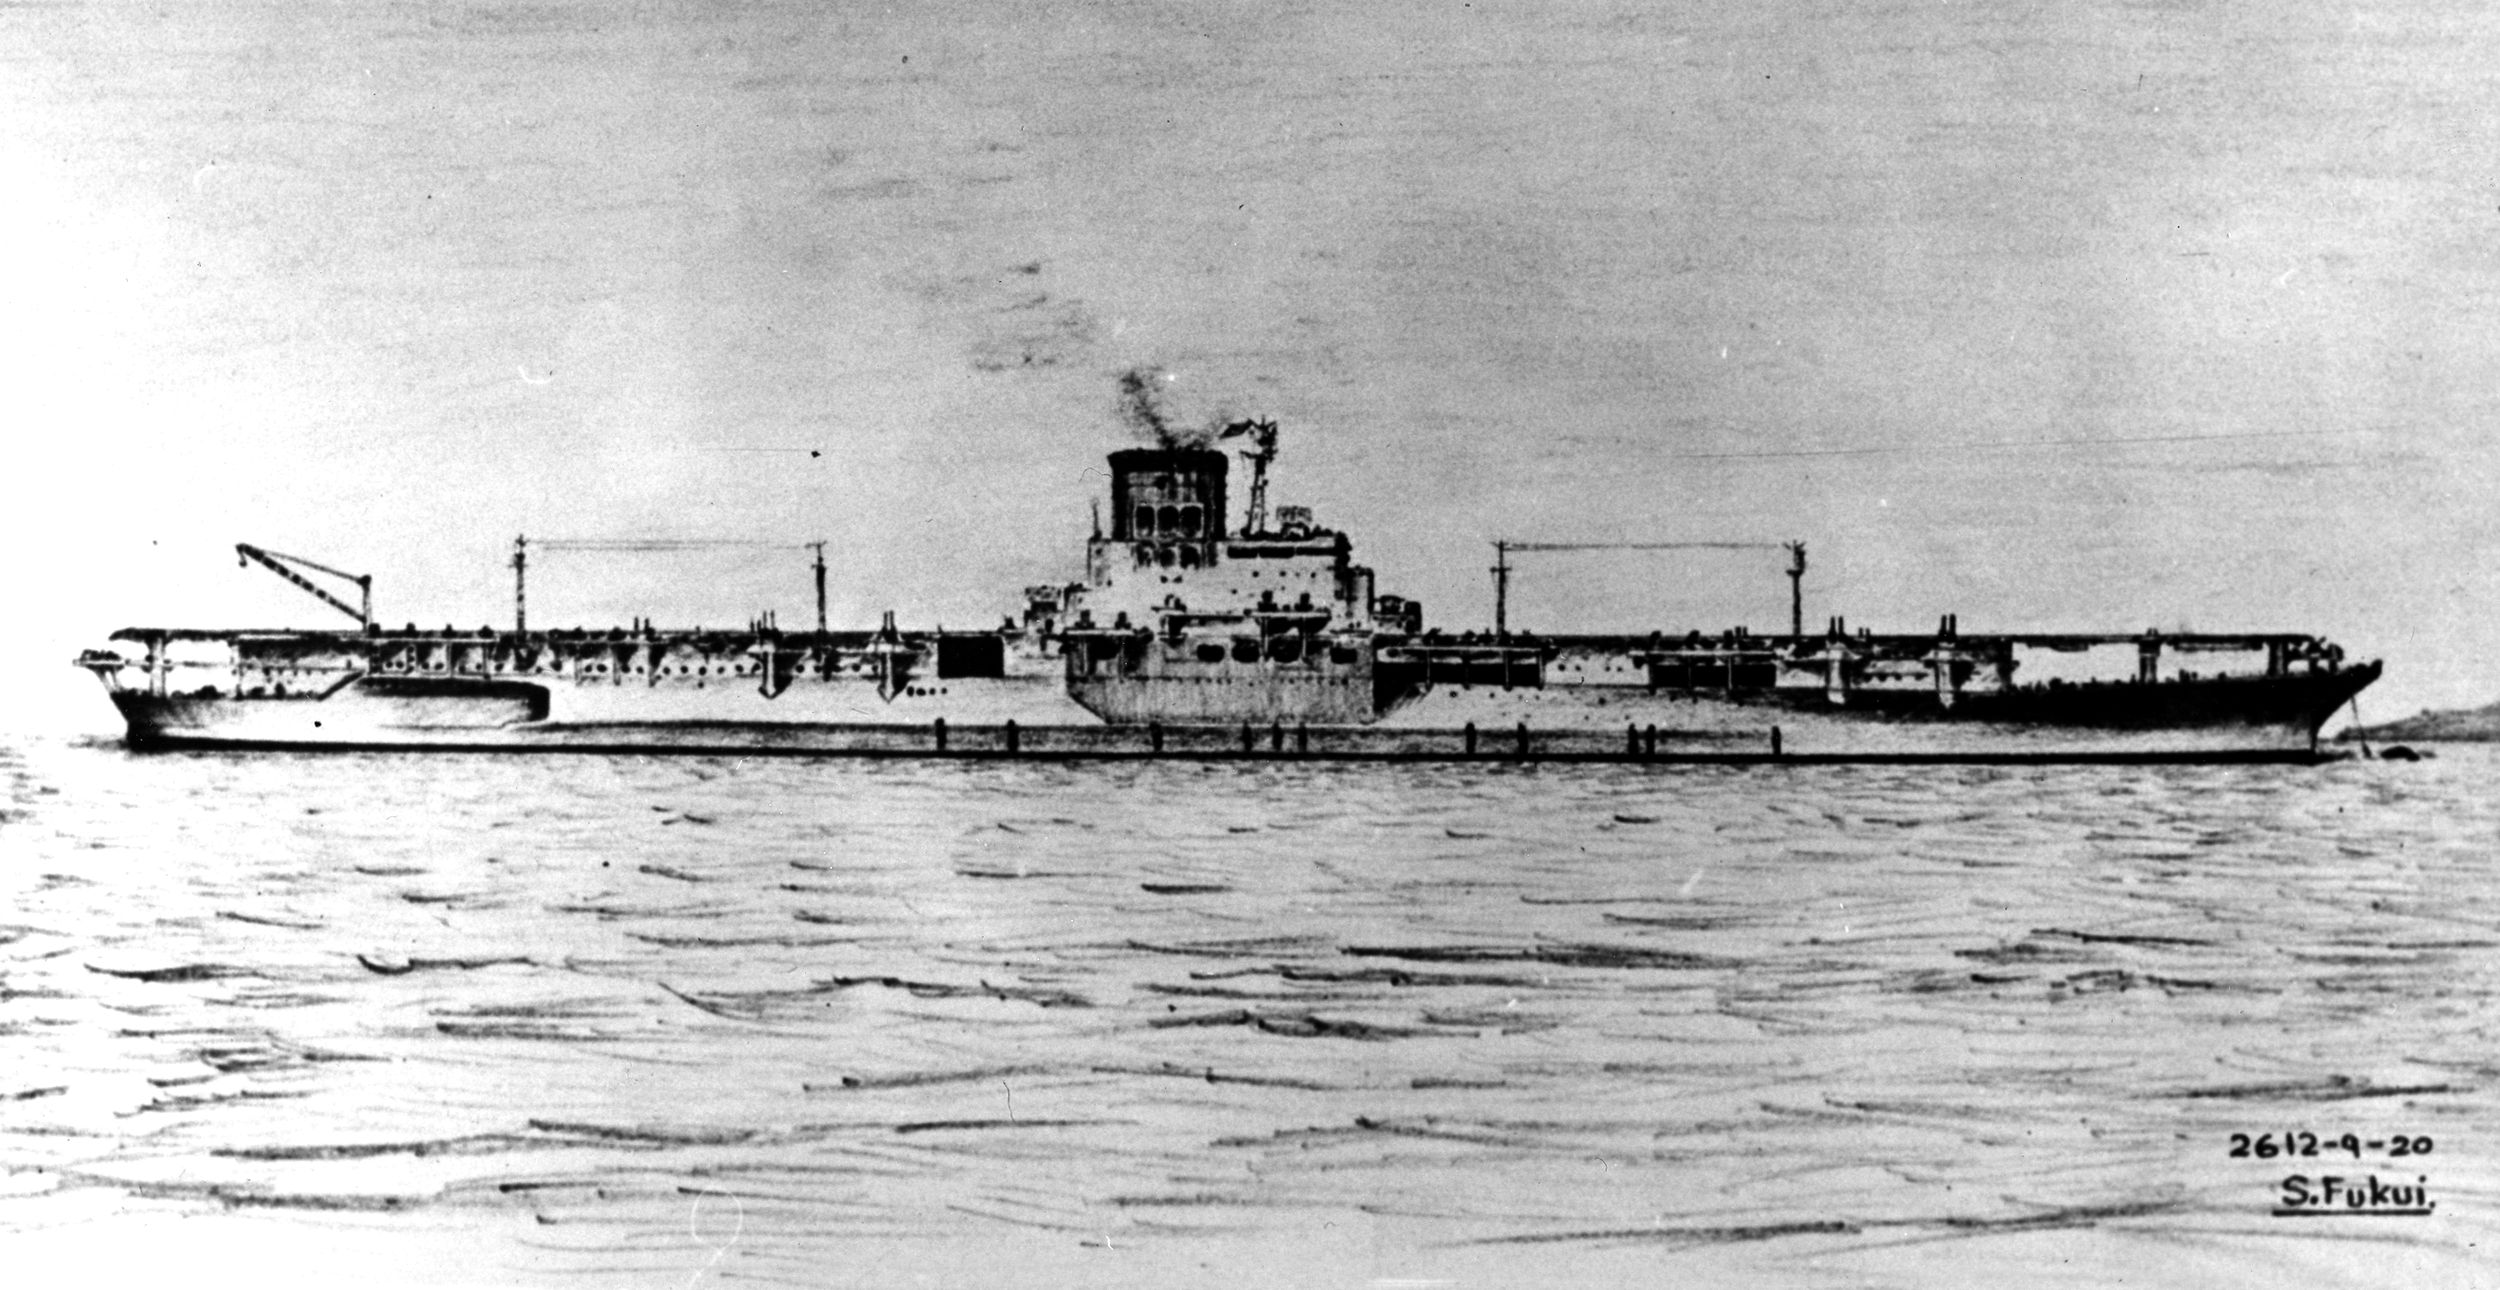 Japanese artist Shizuo Fukui sketched this image of the ill-fated aircraft carrier Shinano in 1952, six years after the warship was sunk by torpedoes from the American submarine USS Archer-Fish. (U.S. Naval Historical Center Photograph)